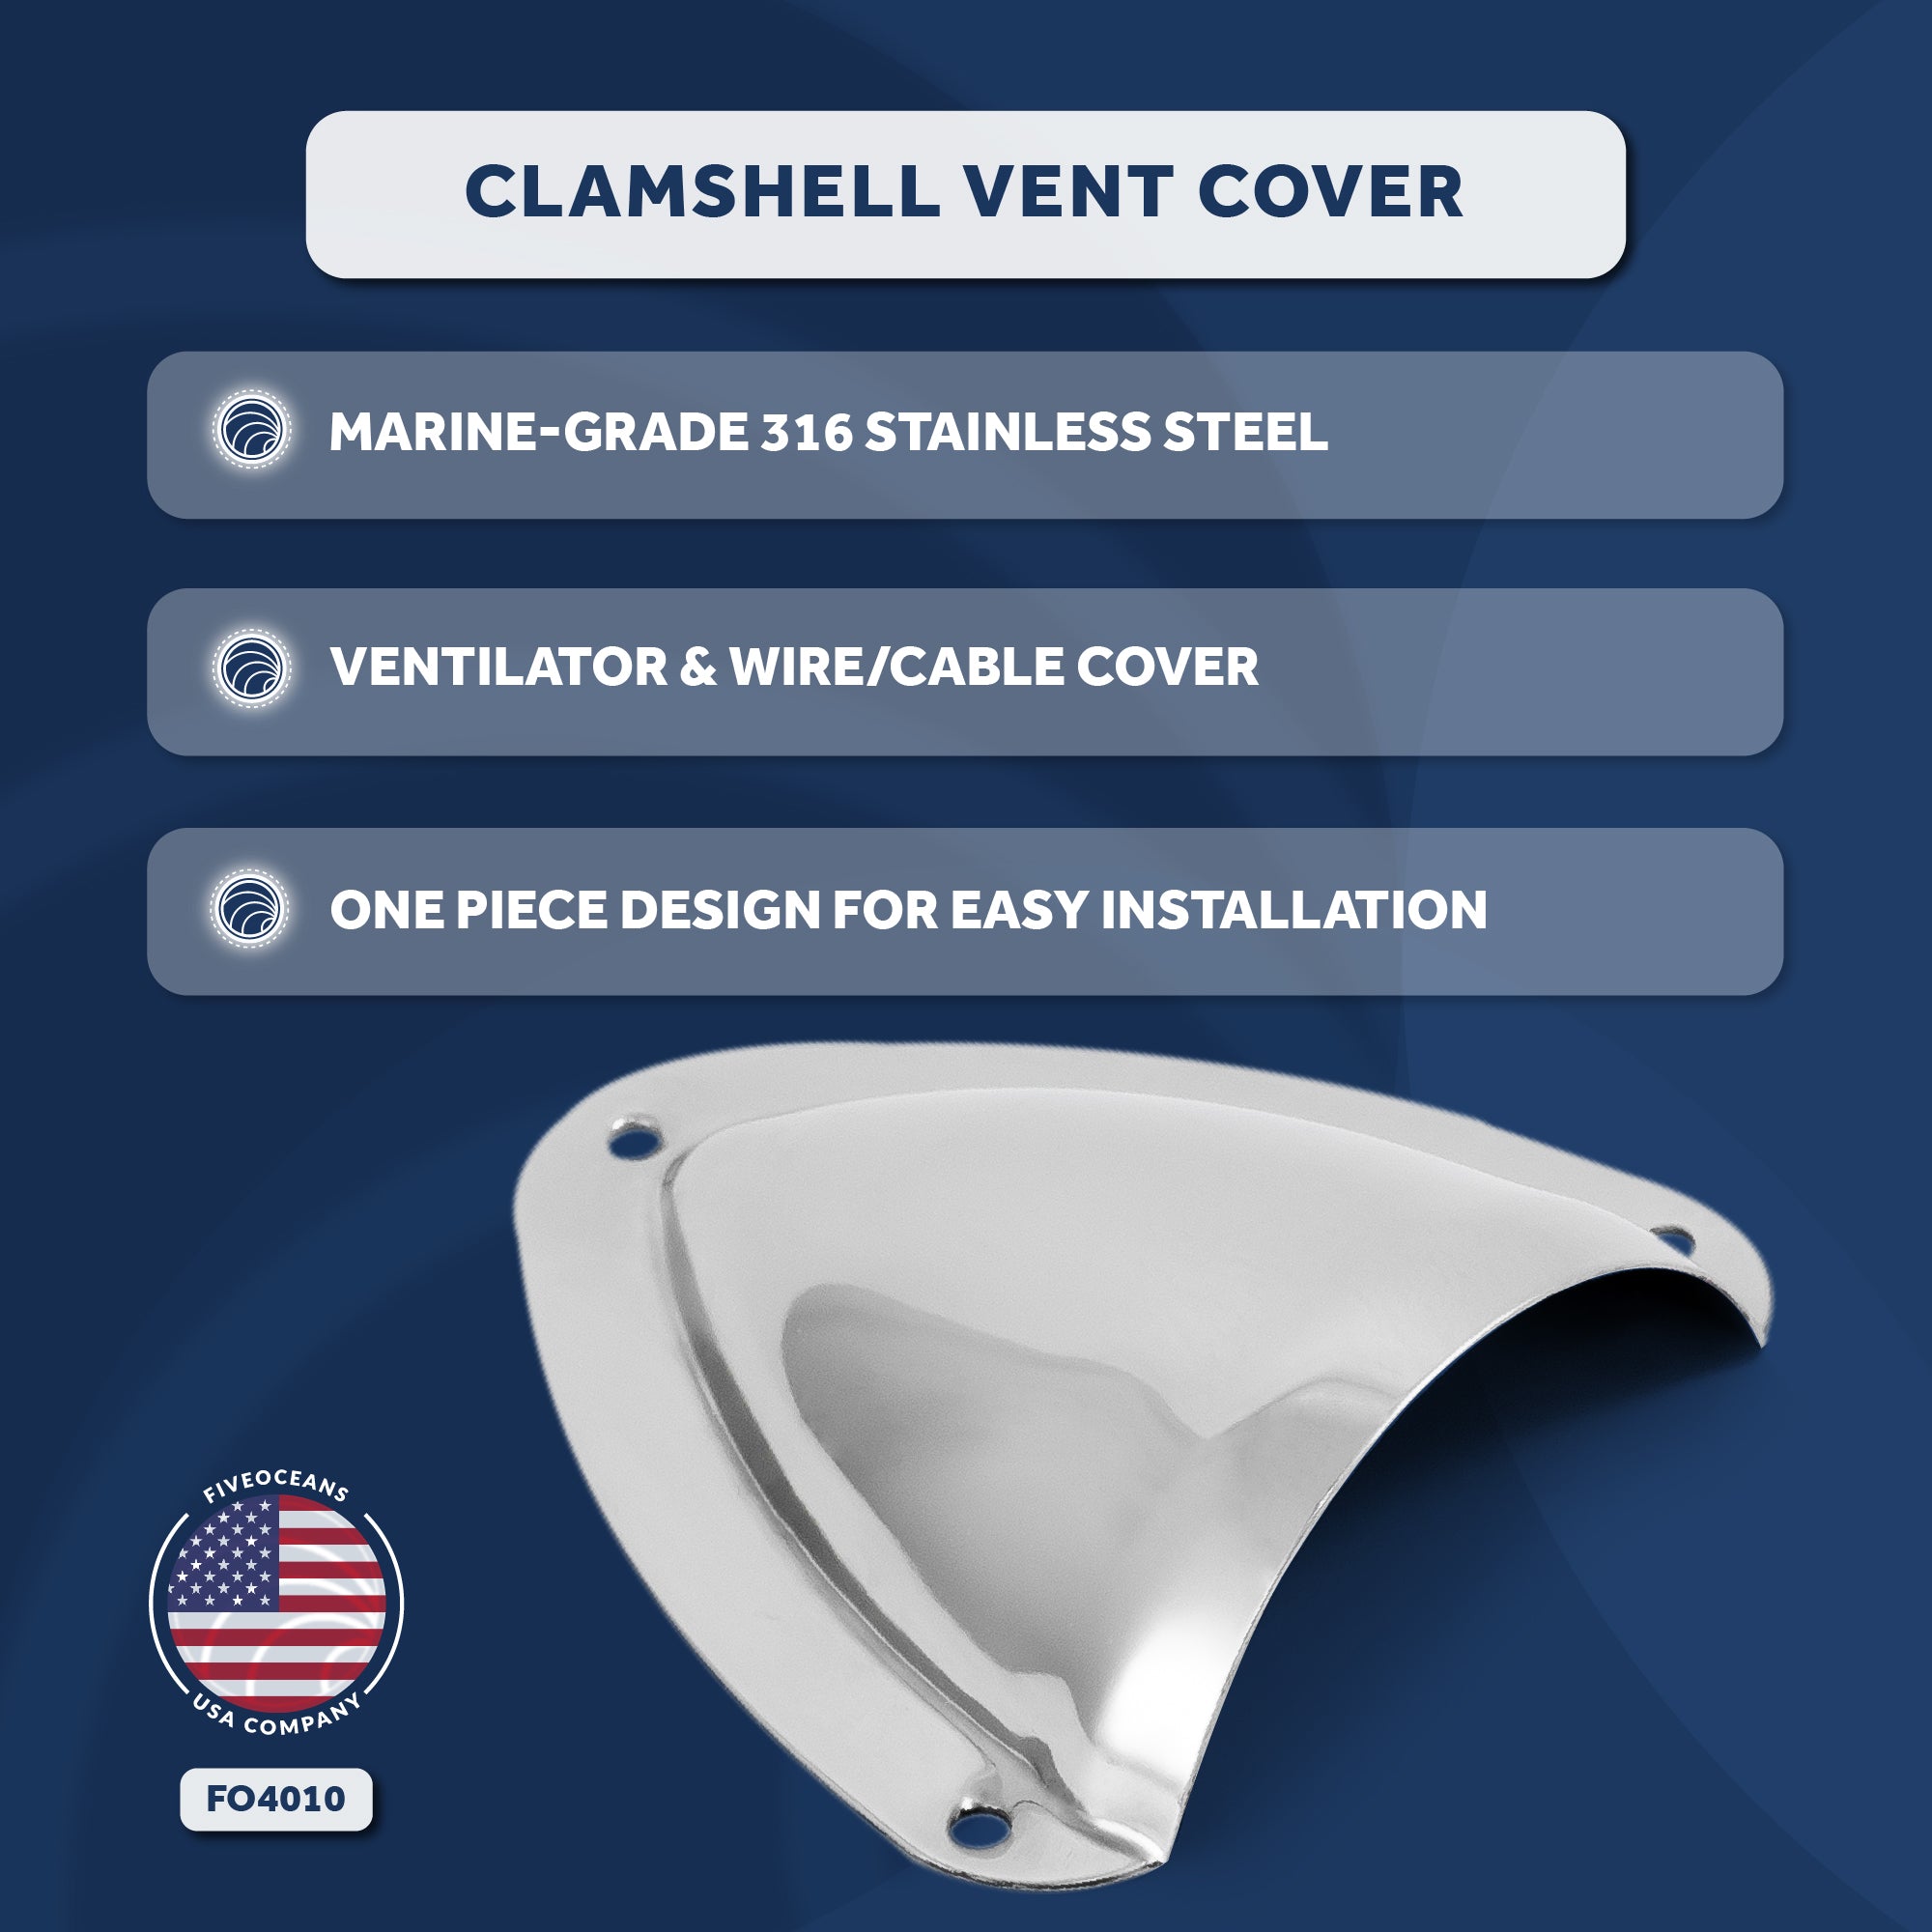 Clamshell Vent Cover, Base 3-11/16" L x 3-7/16" W, Stainless Steel - FO4010